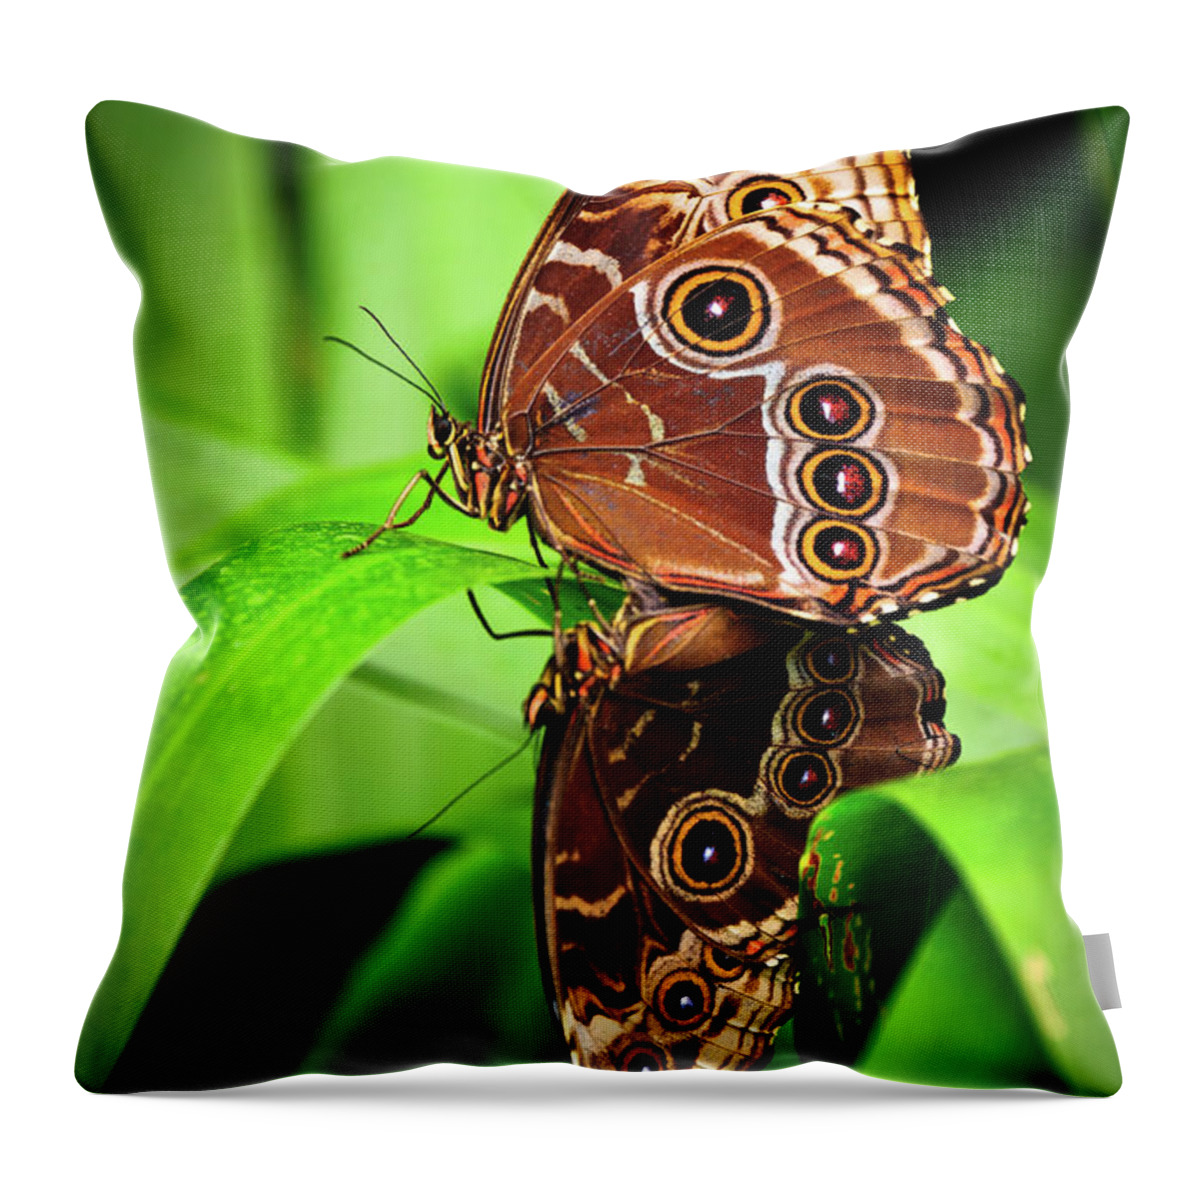 Butterfly Throw Pillow featuring the photograph Mating Butterflies by Harry Spitz